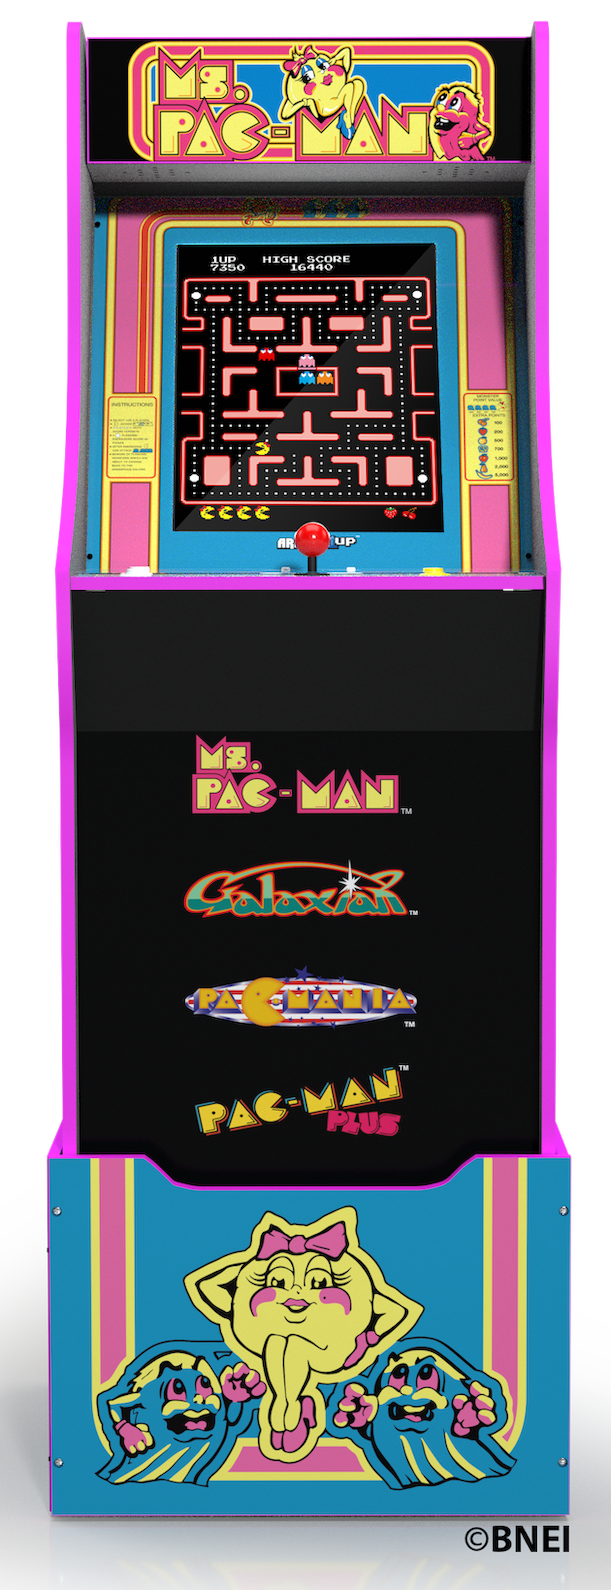 Arcade1Up, Ms. Pacman Arcade Machine with Riser - image 1 of 6